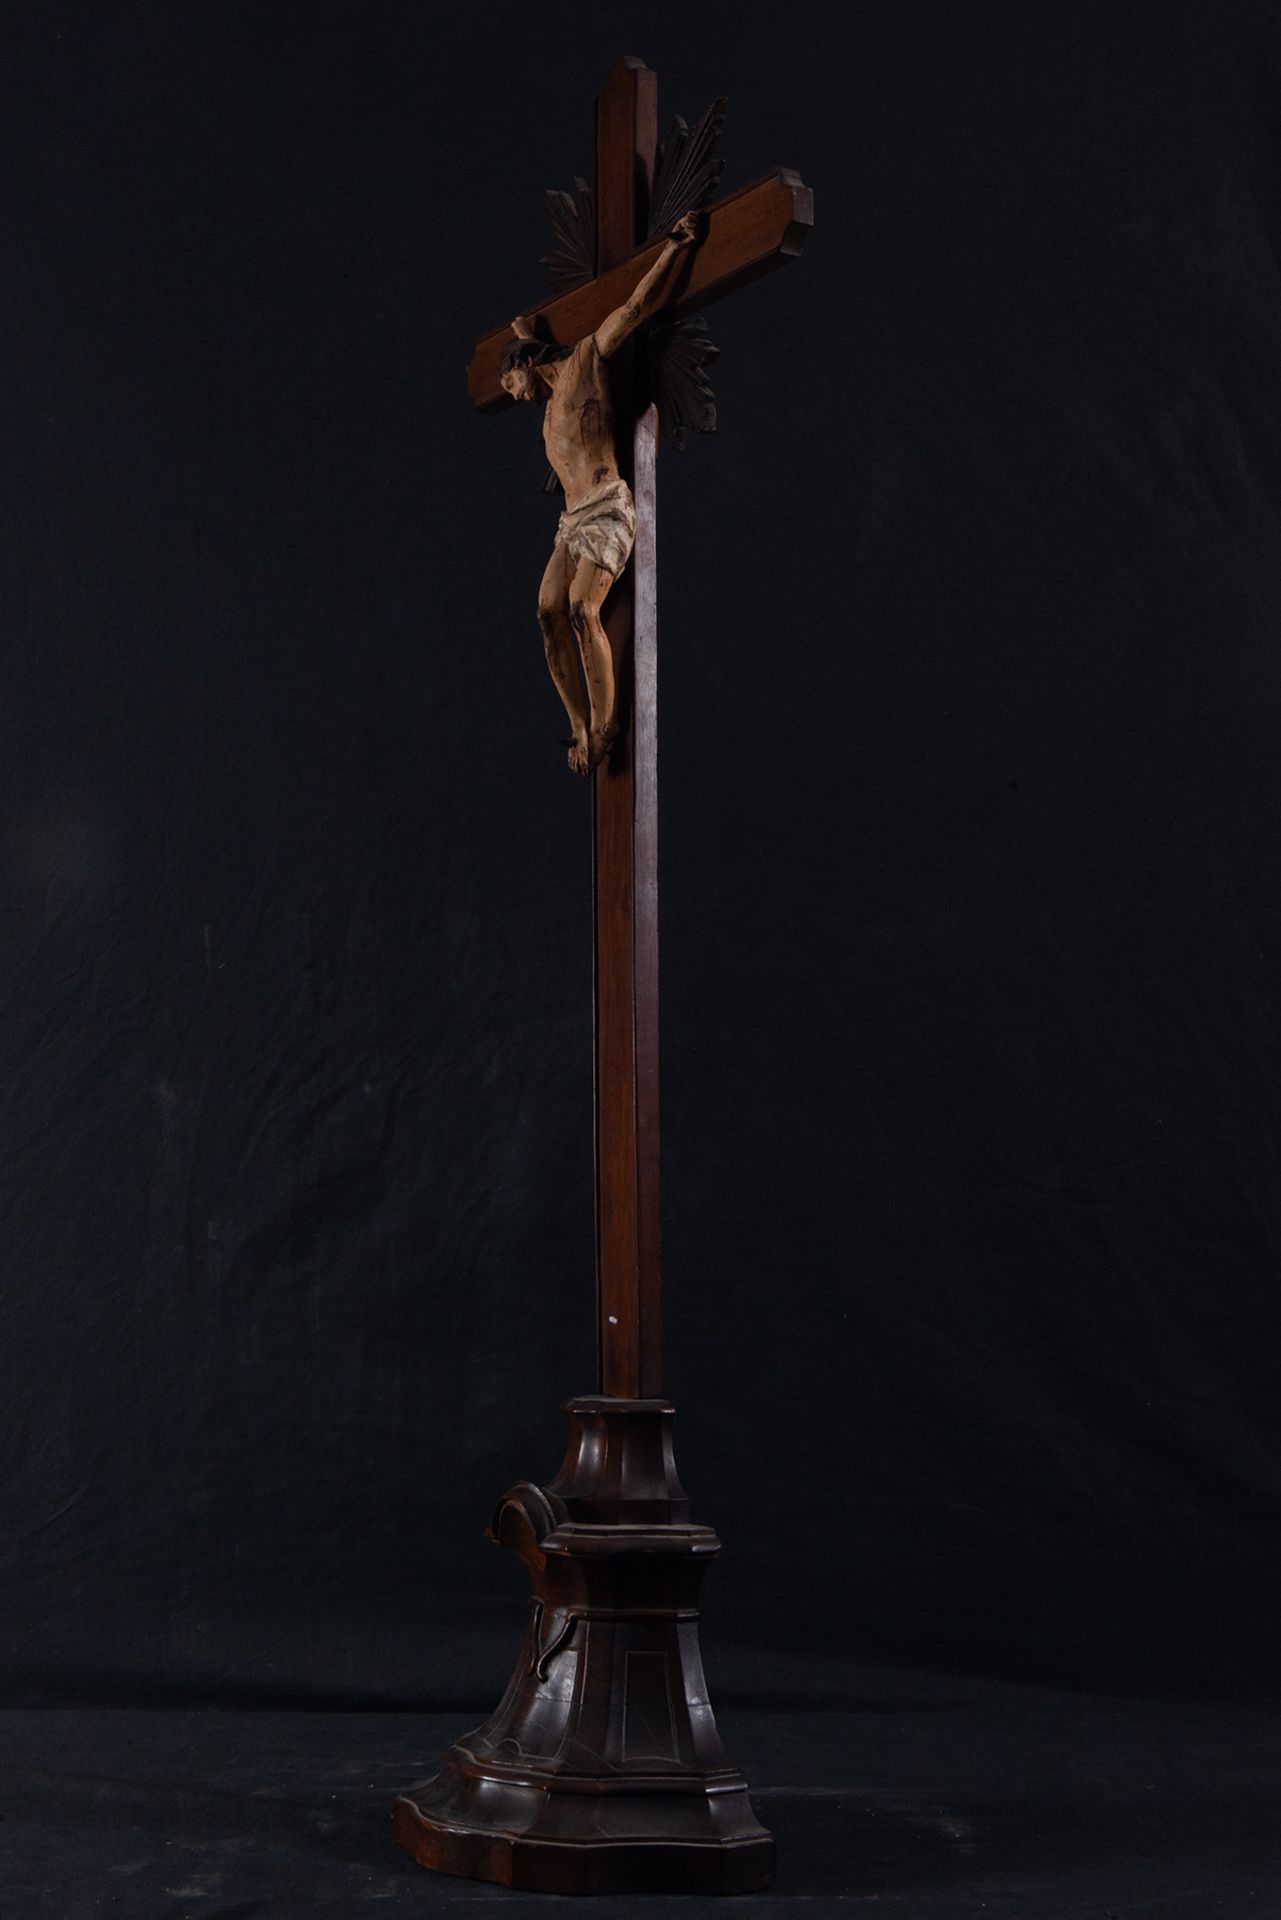 Christ on the Cross, colonial Quito or Guatemalan work from the 18th century - Image 3 of 7